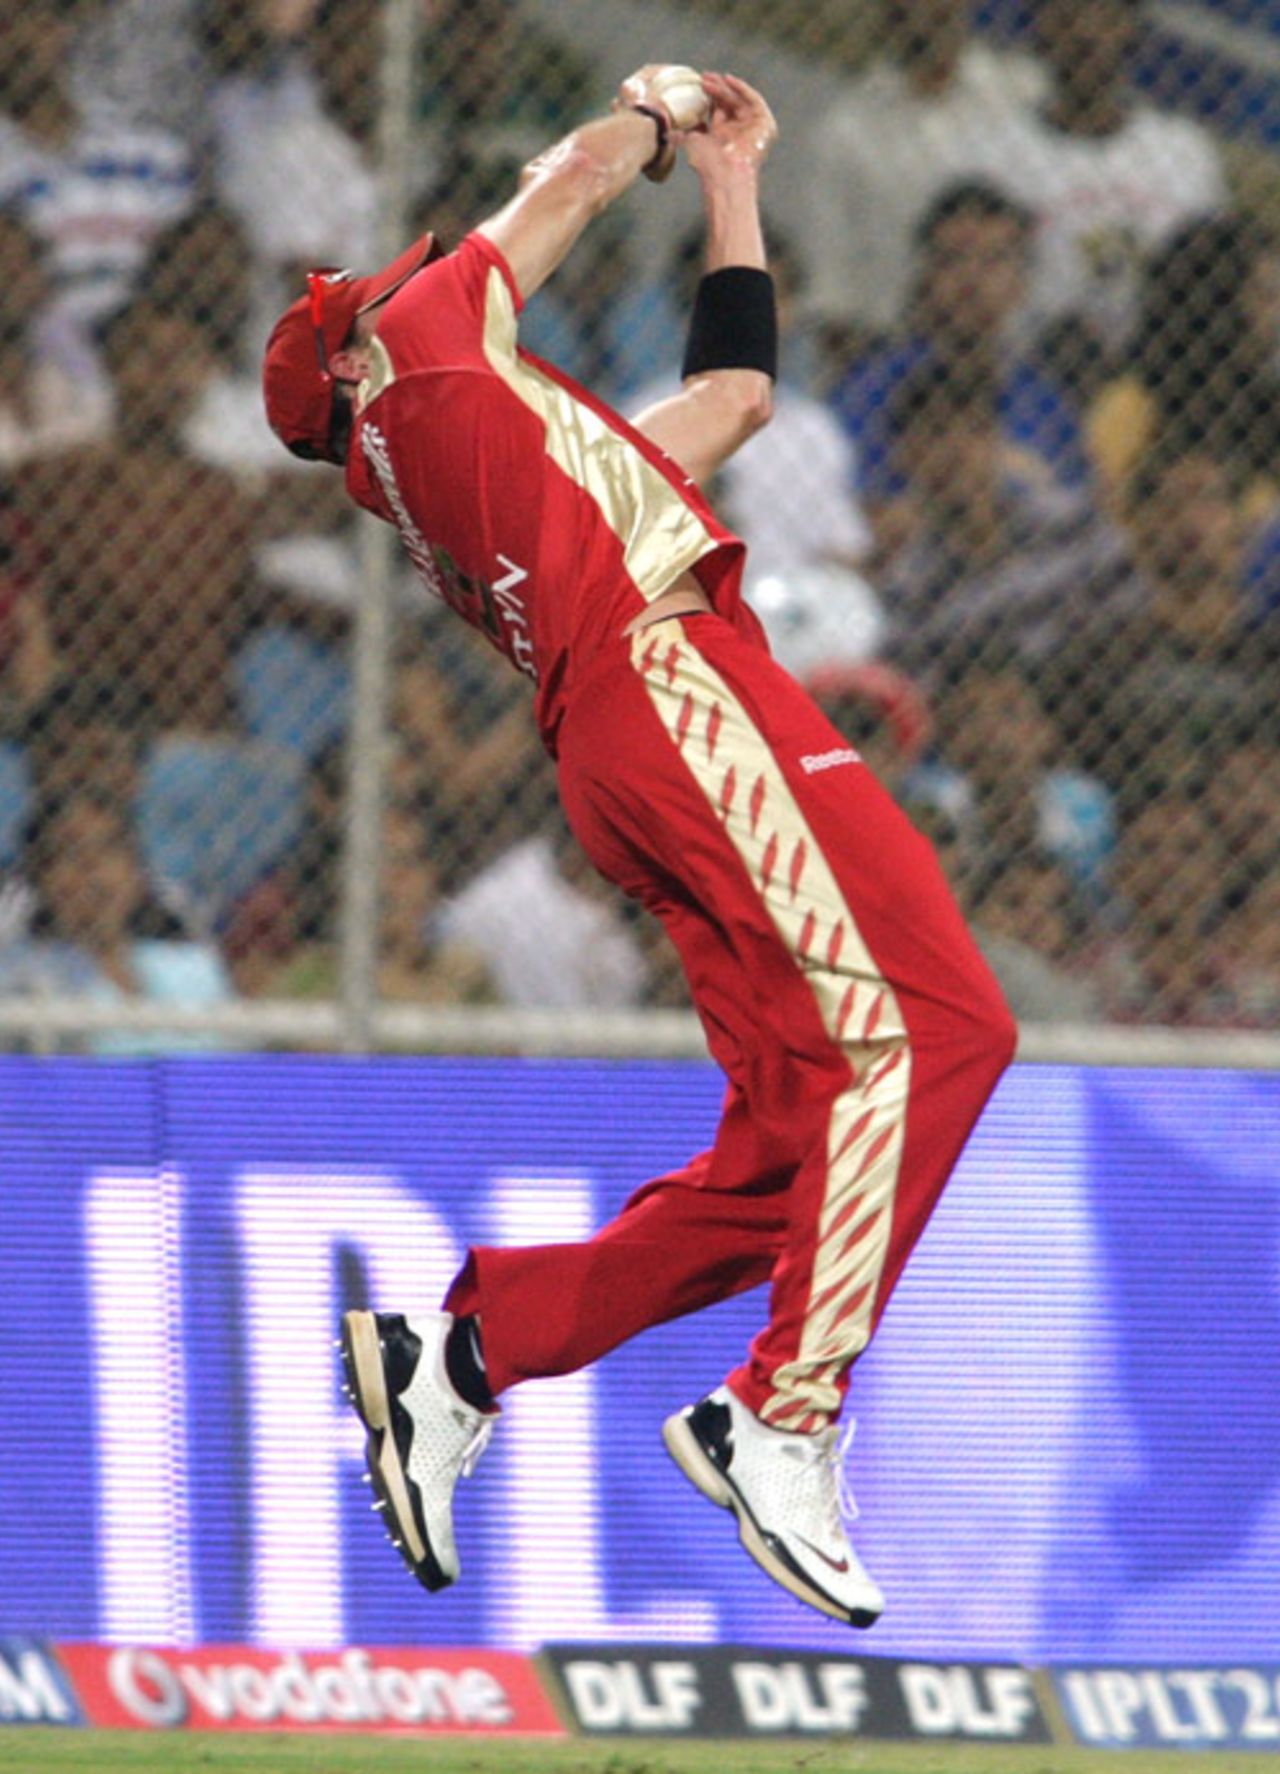 Dale Steyn drops a catch off Andrew Symonds, Deccan Chargers v Royal Challengers Bangalore, IPL, Mumbai, April 24, 2010